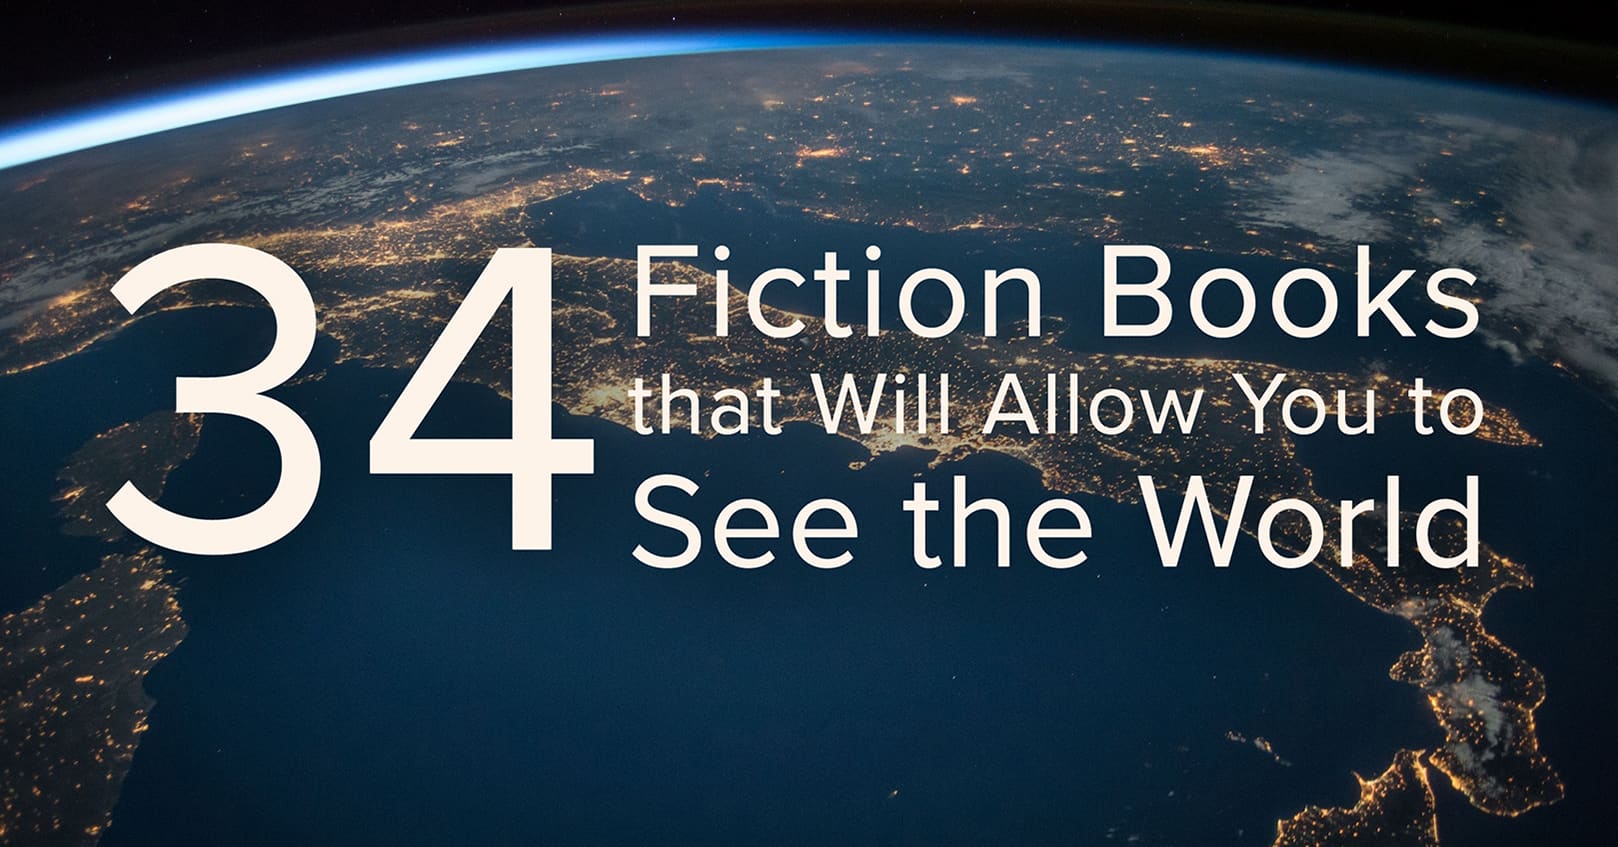 fiction books that allow you to see the world